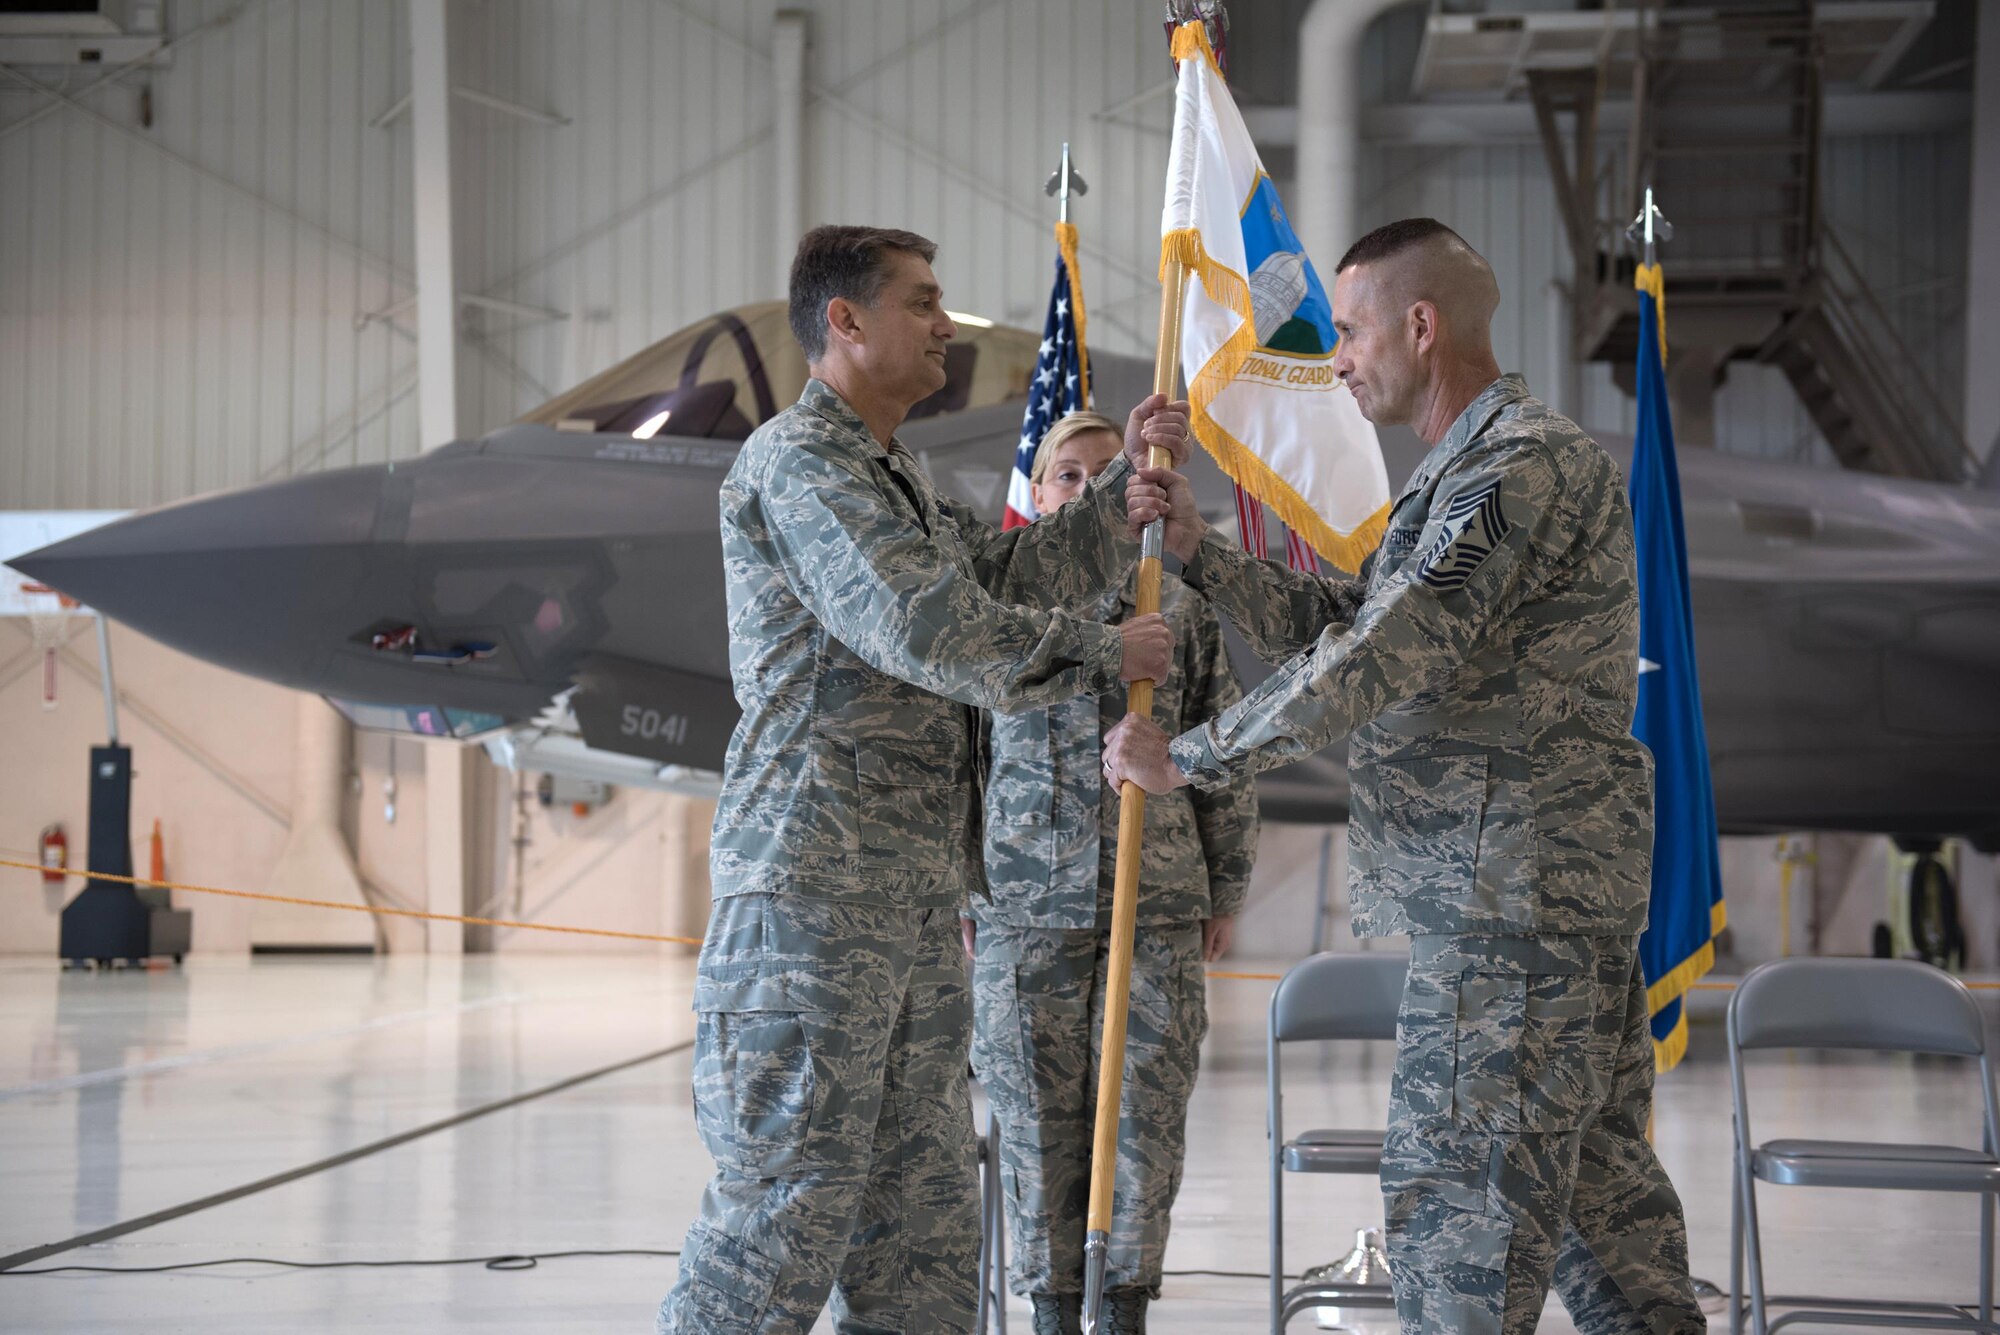 Chief Master Sgt. Ray Dawson (right) accepts the guidon of Headquarters, Kentucky Air National Guard, from Brig. Gen. Warren Hurst, Kentucky’s assistant adjutant general for Air, to become the Commonwealth’s newest state command chief during a ceremony at the Kentucky Air National Guard Base in Louisville, Ky., April 22, 2017. Dawson replaces Chief Master Sgt. Jeff Moore, who is retiring after more than 35 years of service to the United States Air Force and Kentucky Air Guard. (Kentucky Air National Guard photo by 1st Lt. James W. Killen)